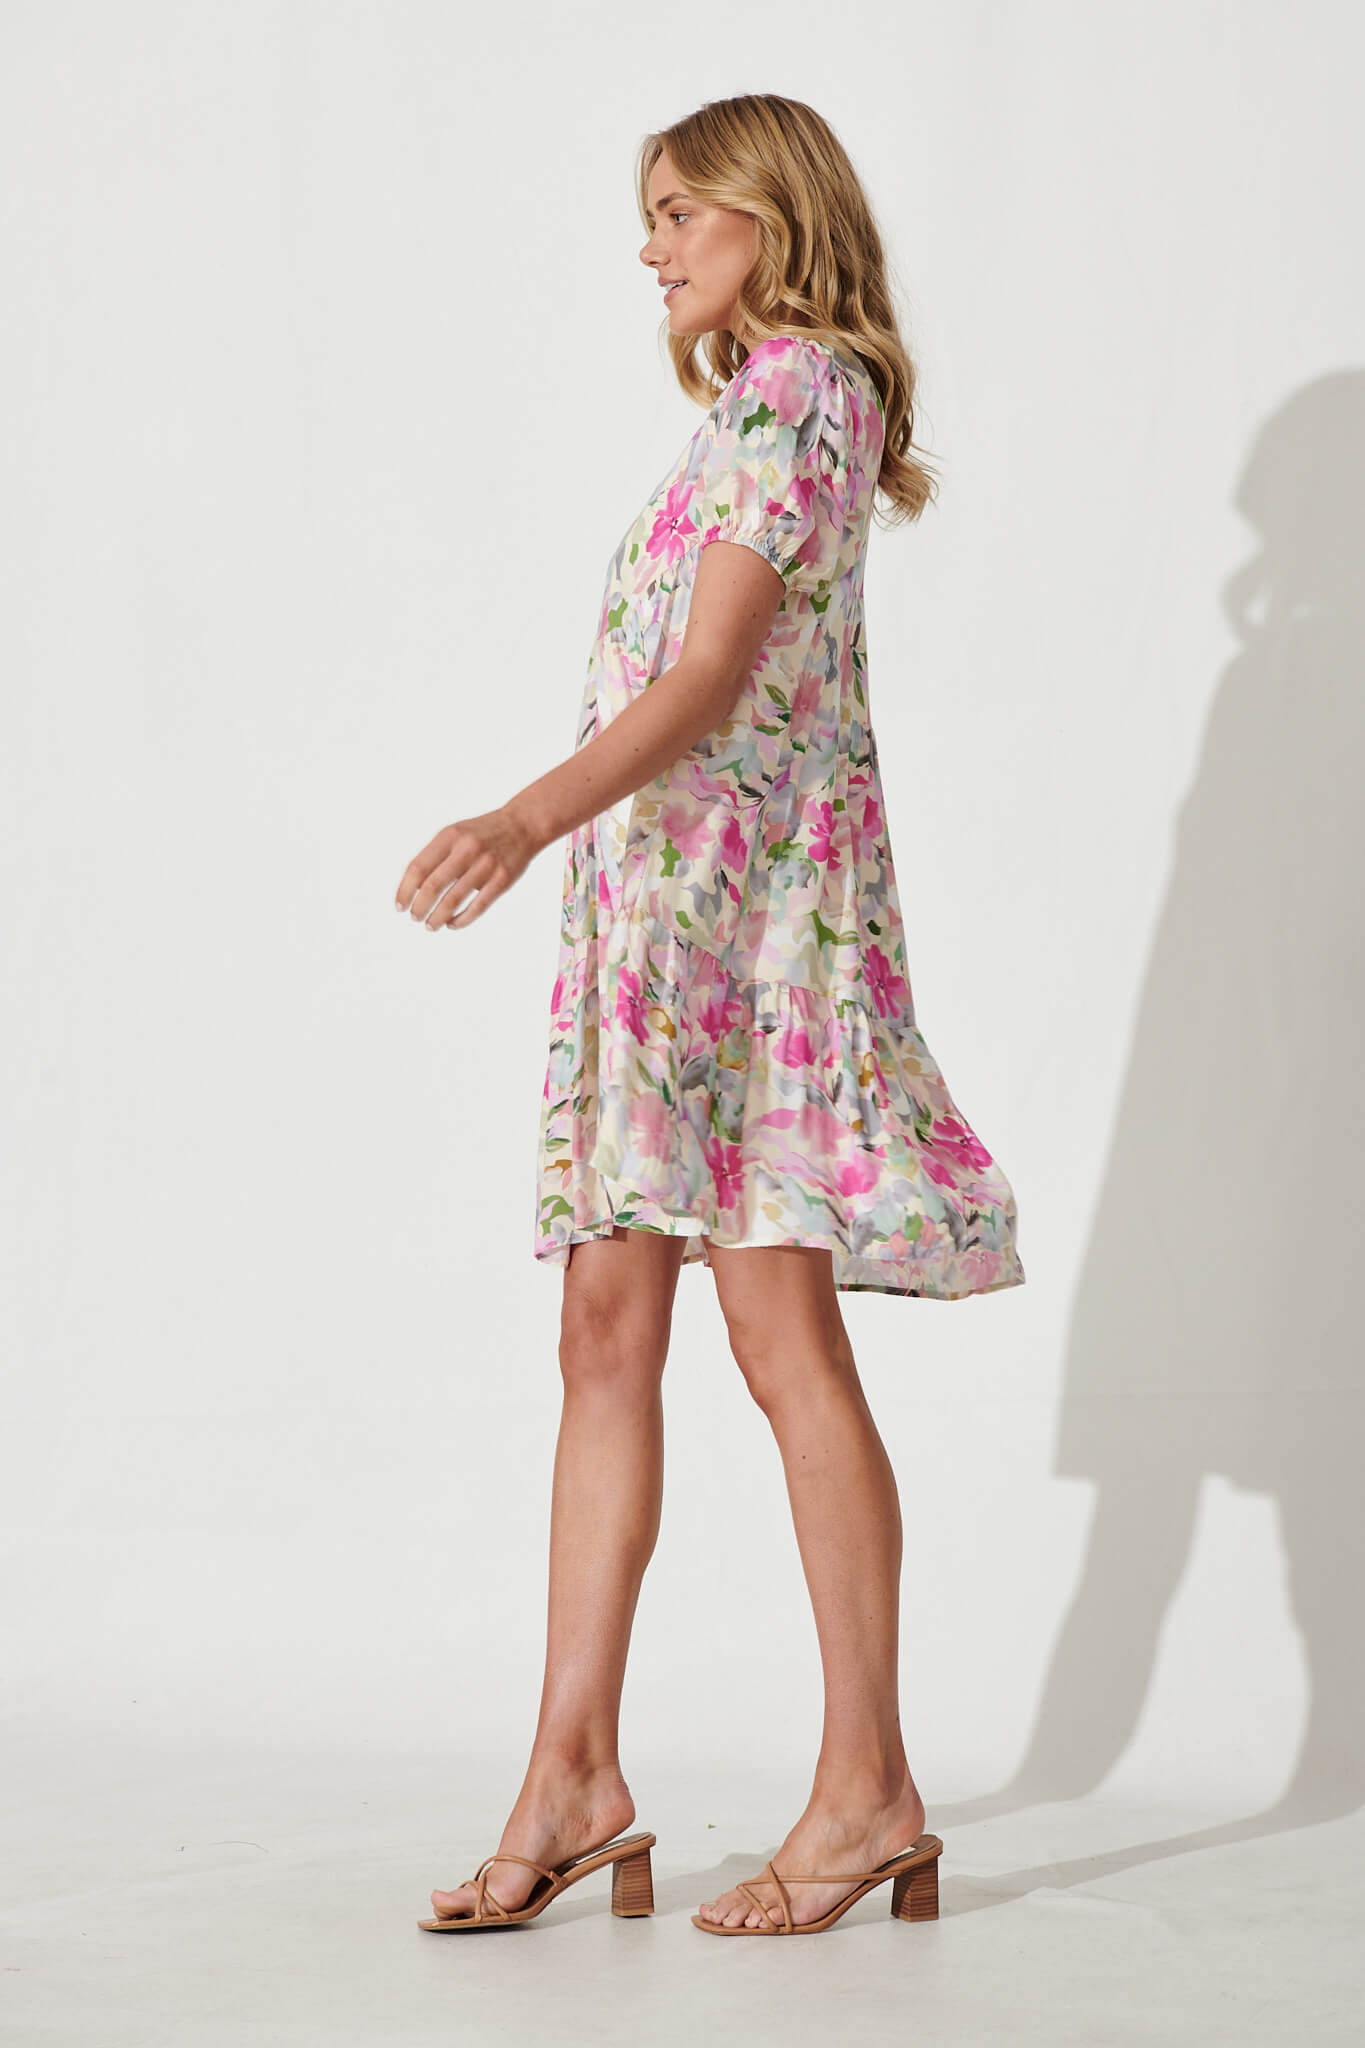 Smocked Dresses: Shop The Little-Girl Staple That Adults Are Wearing Now